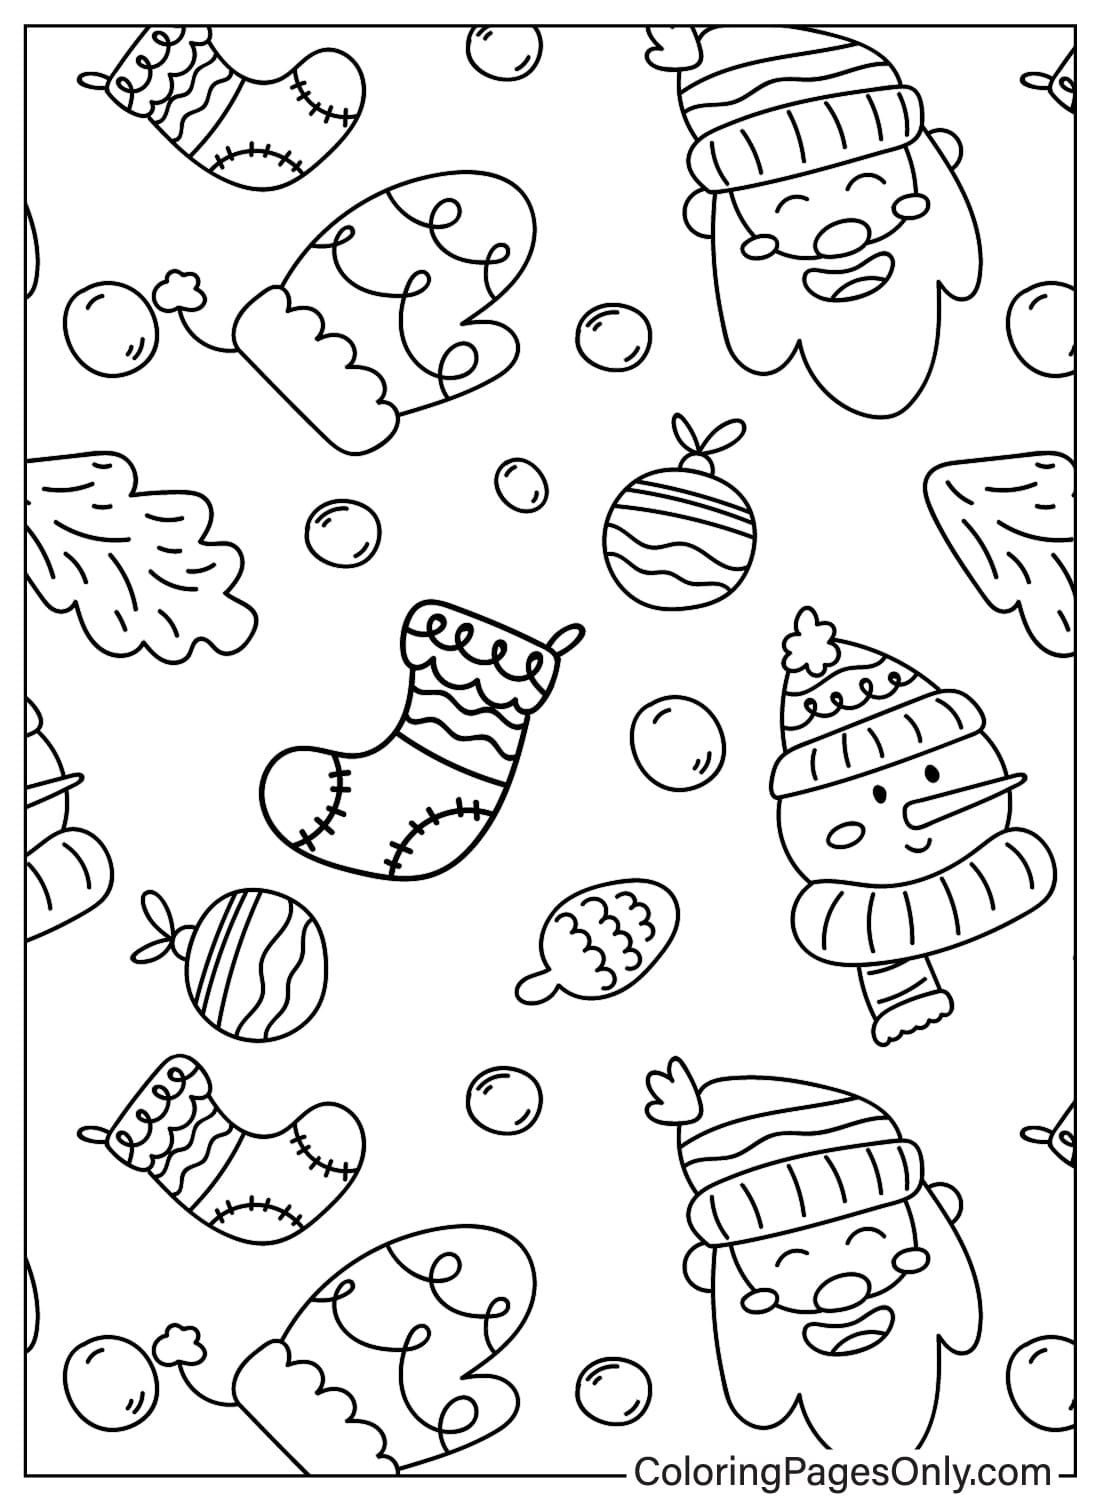 Printable Christmas Pattern Coloring Page from Christmas Pattern